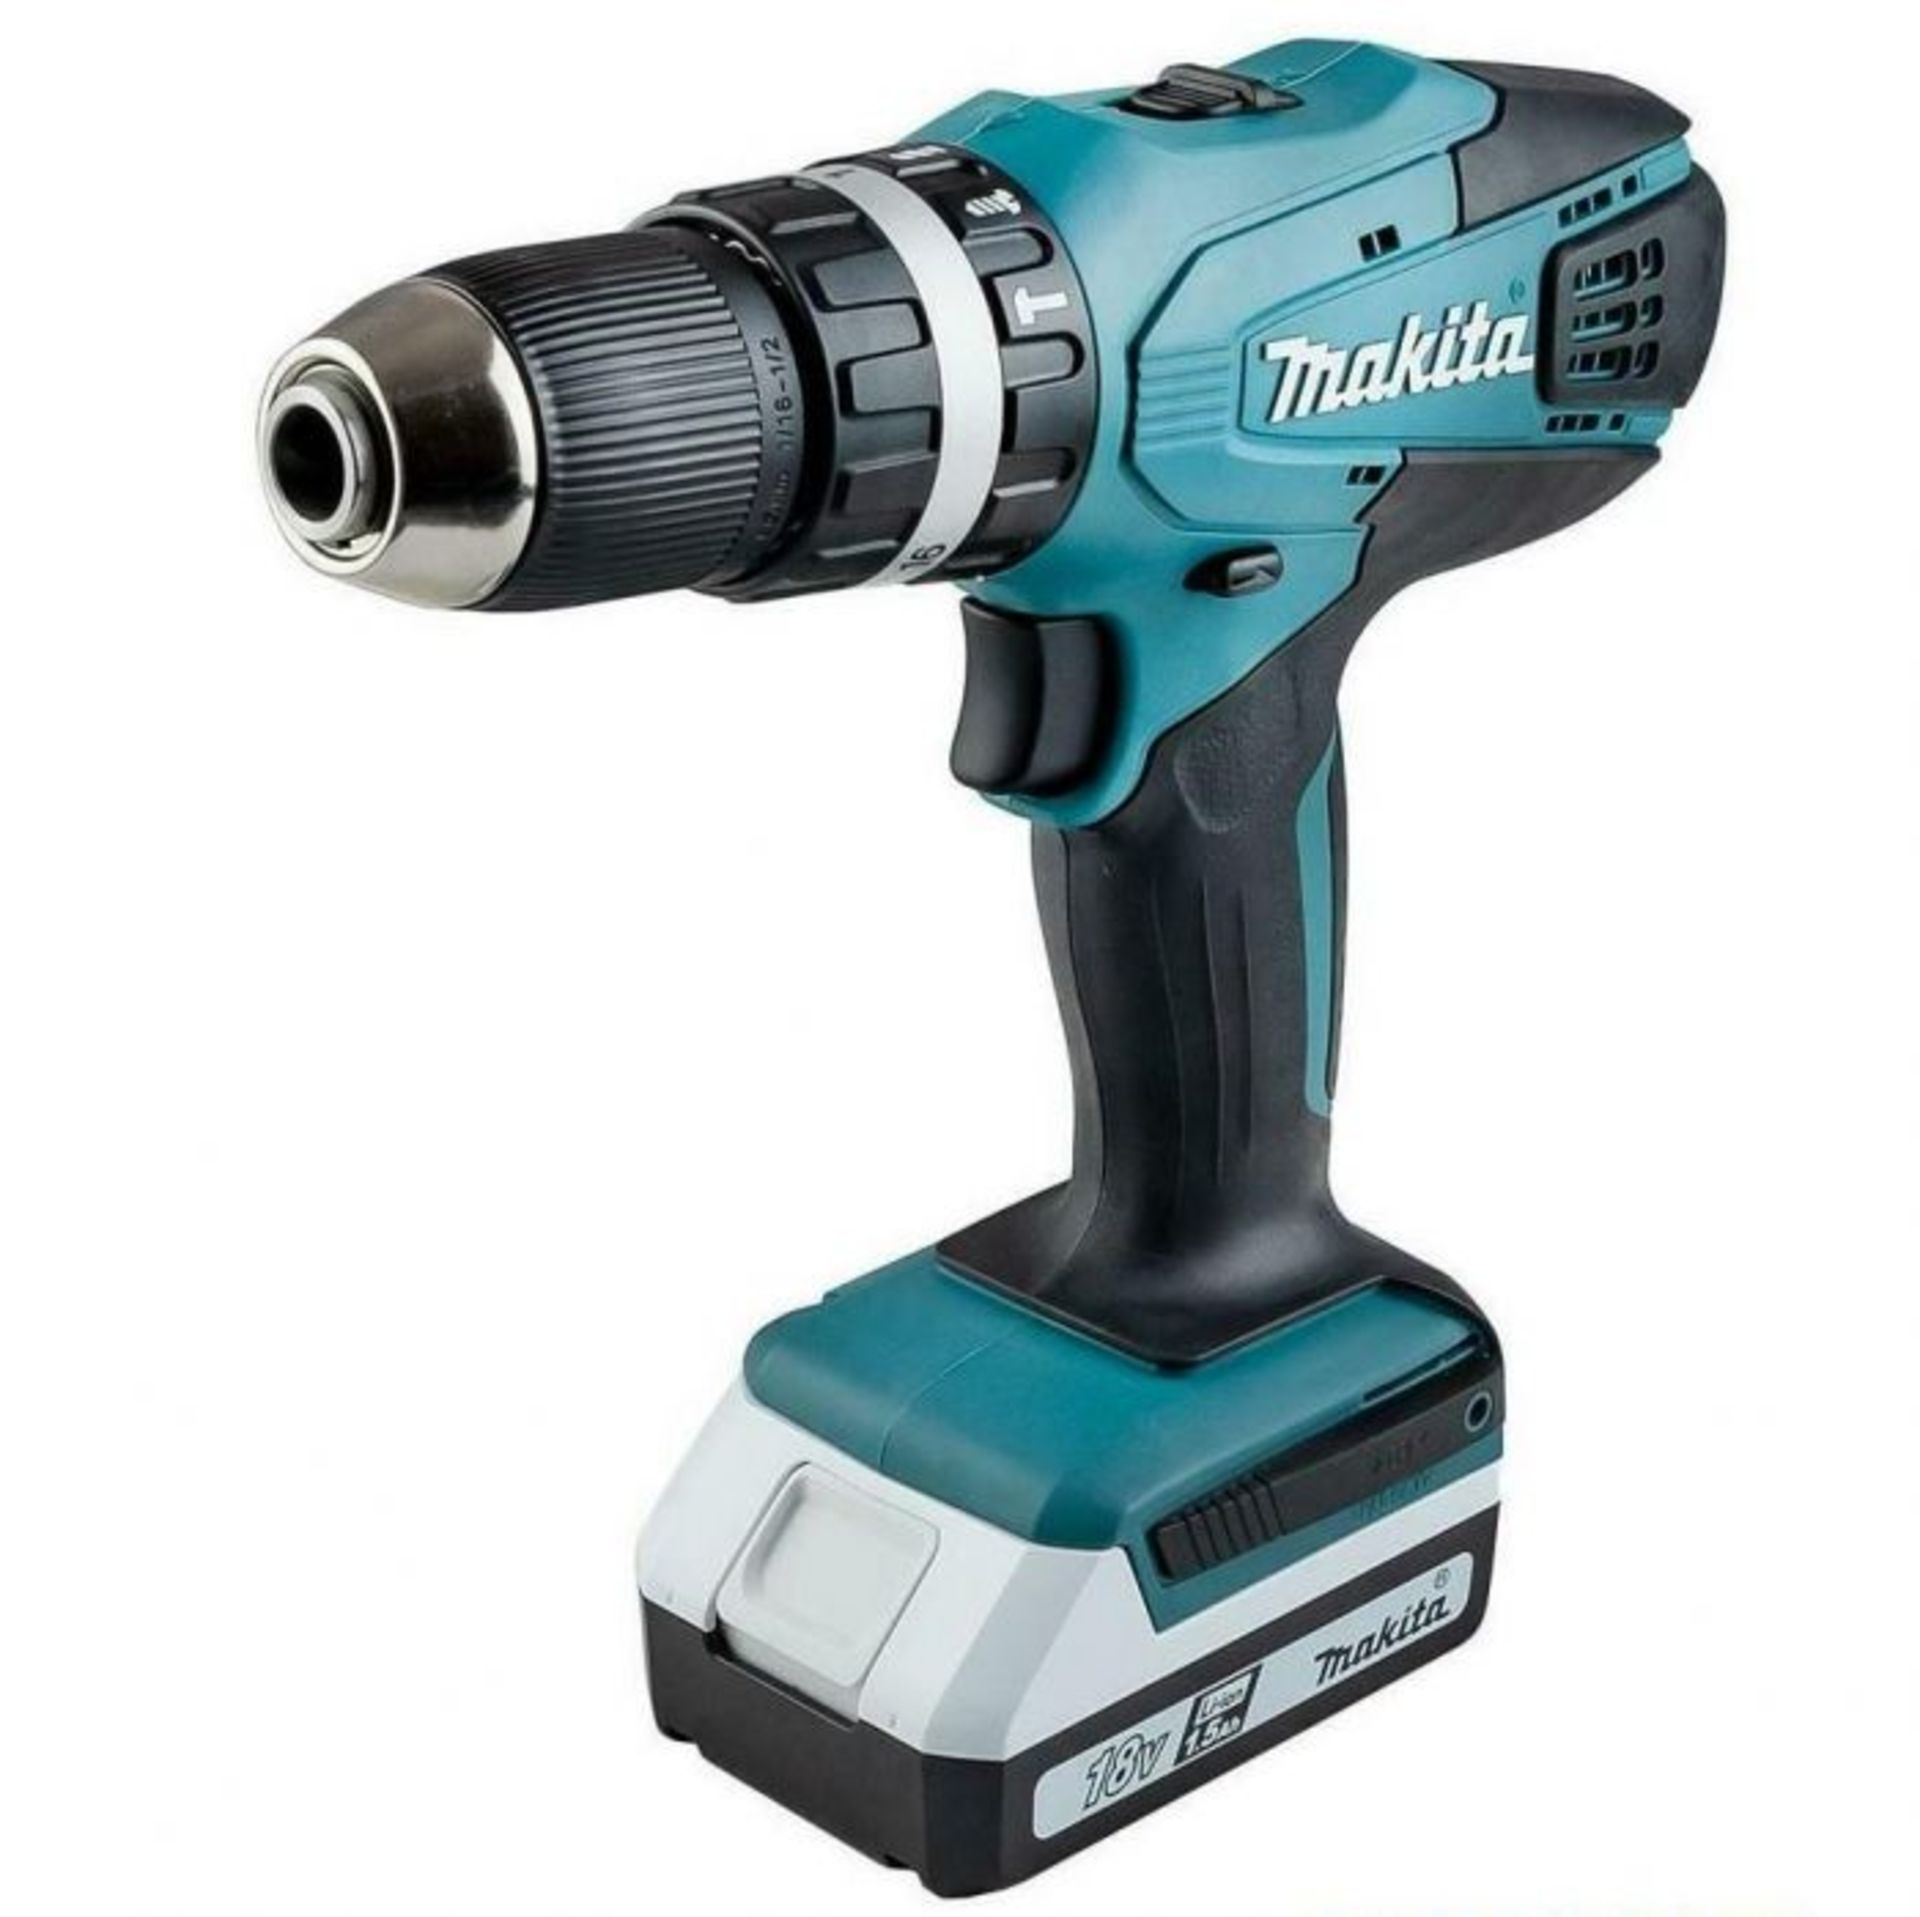 V Brand New Makita 18v Cordless Hammer Drill With Battery And Charger And Case - Image 3 of 3